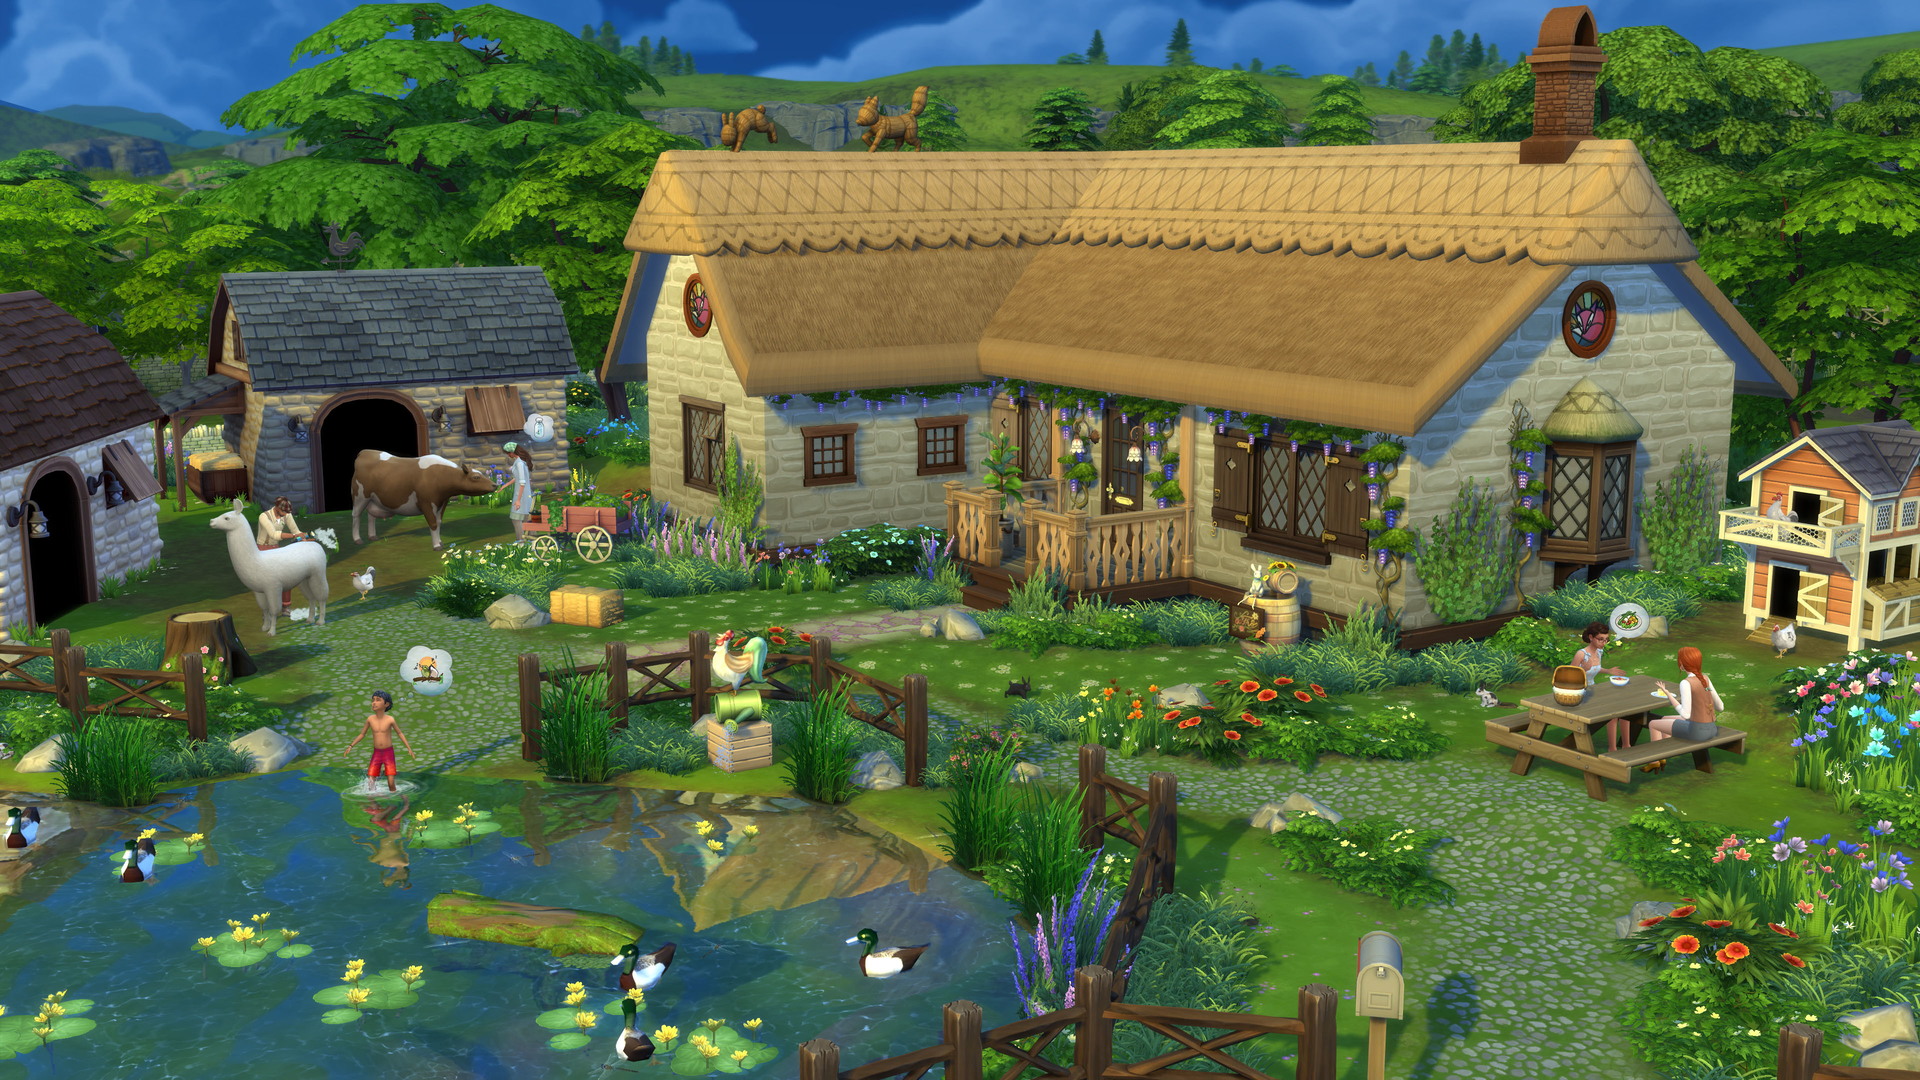 The Sims 4: Cottage Living - screenshot 2